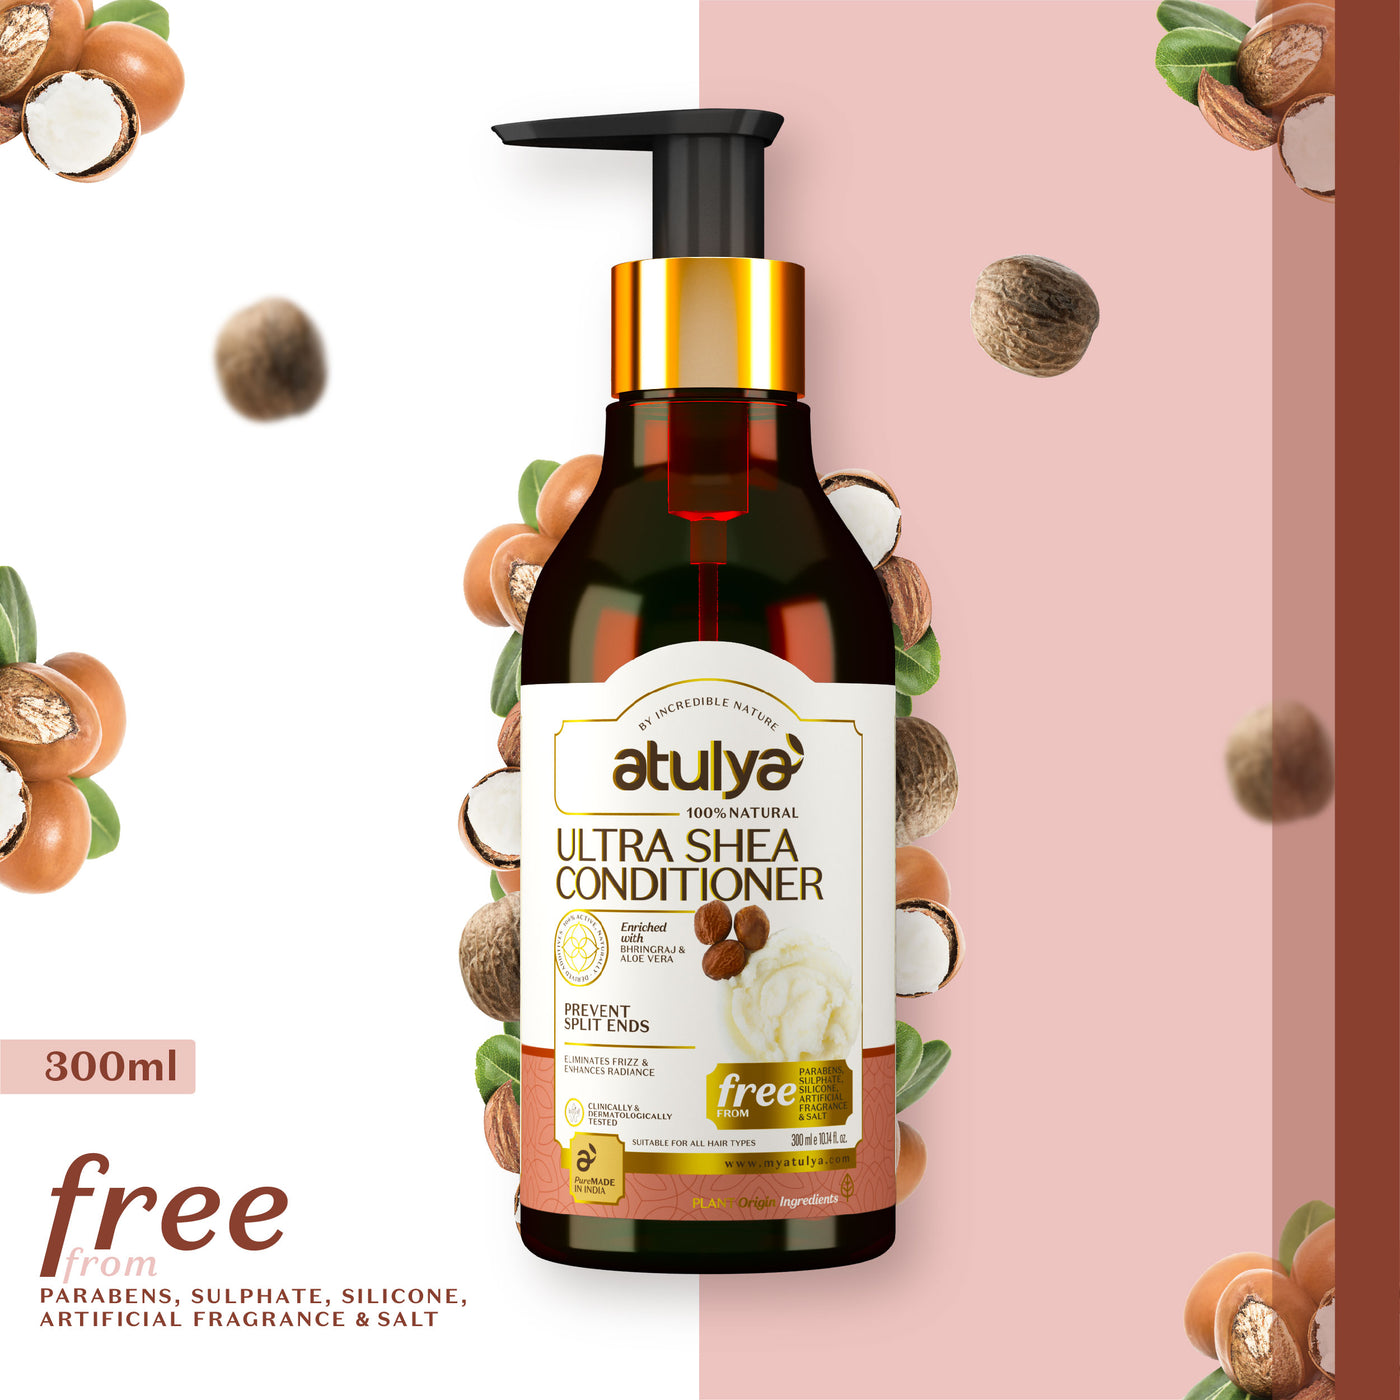 atulya Ultra Shea Hair Conditioner for Controlling Split Ends